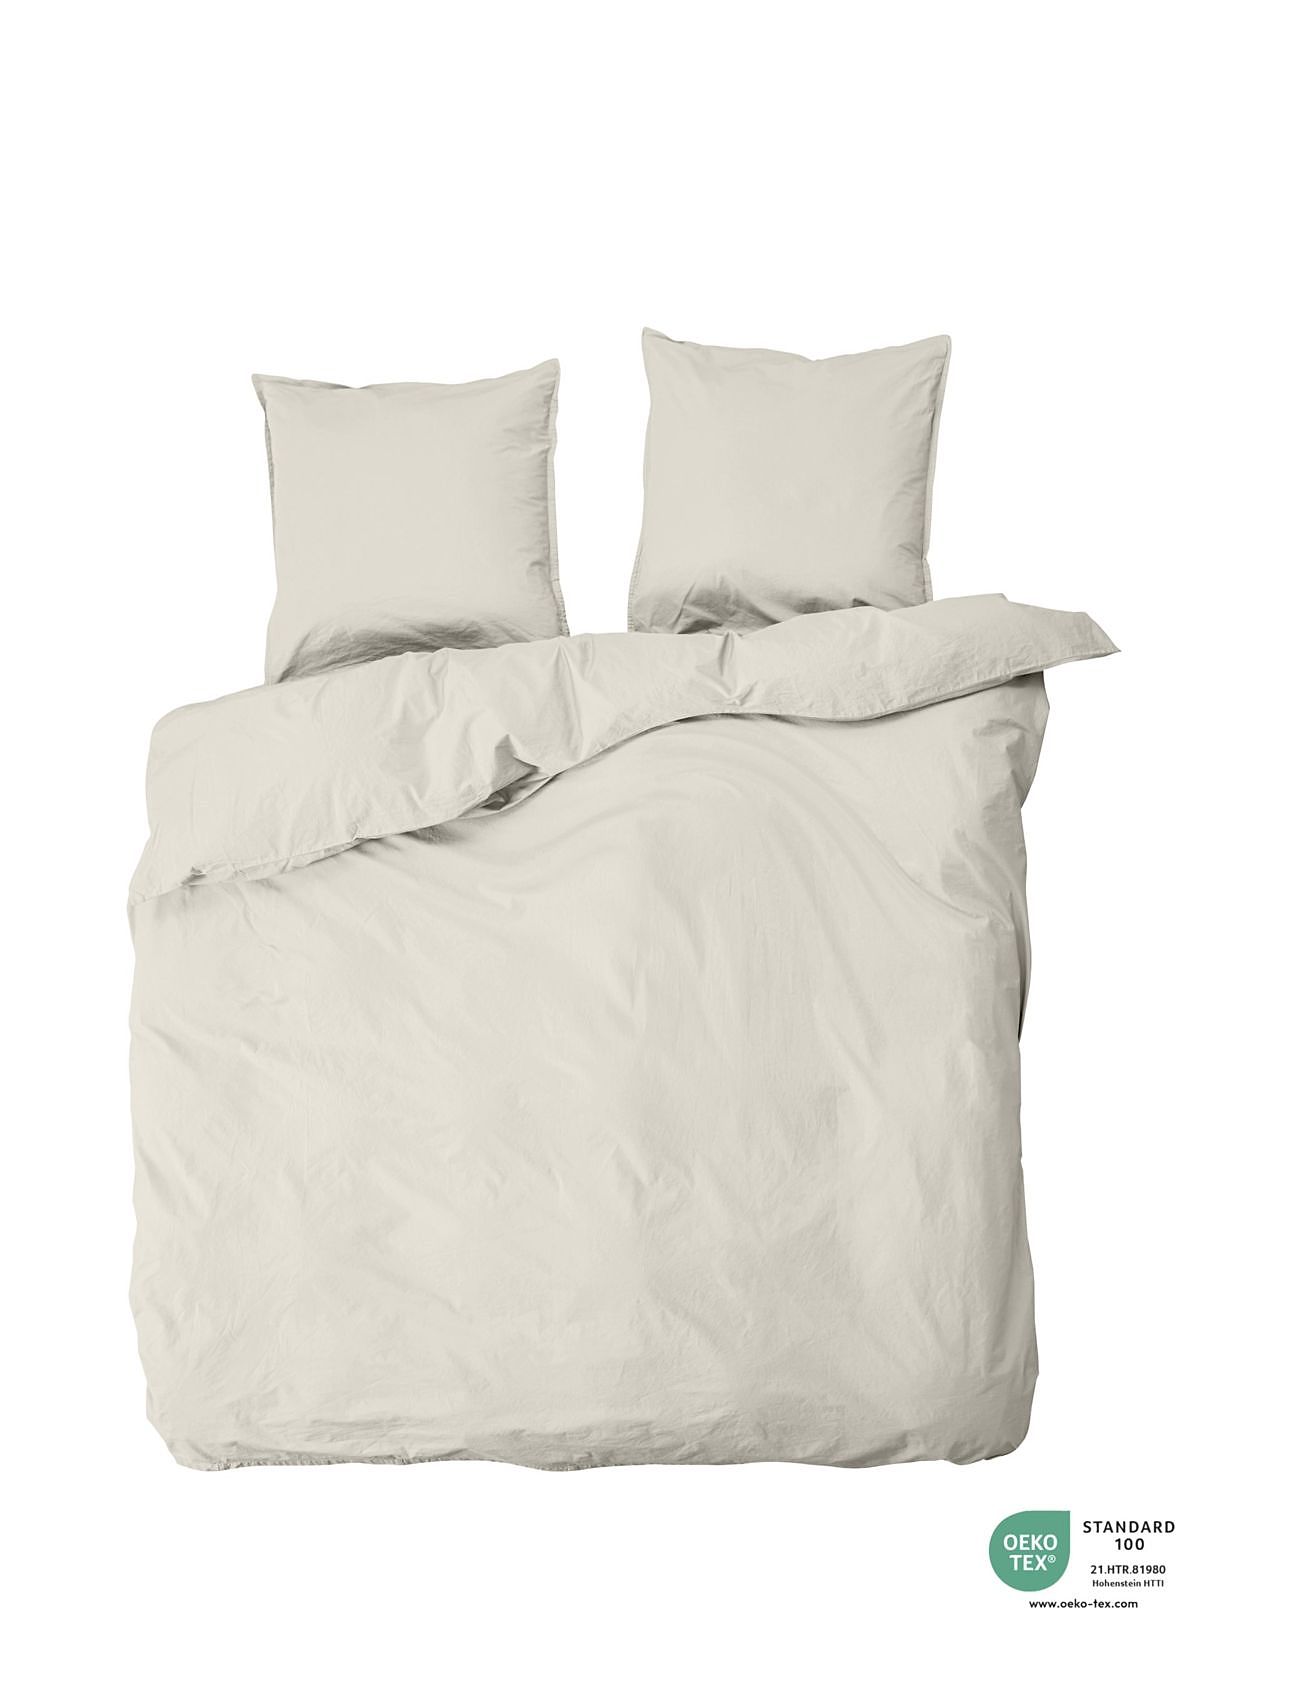 Double Bed Linen, Ingrid, Shell Home Textiles Bedtextiles Bed Sets Cream By NORD